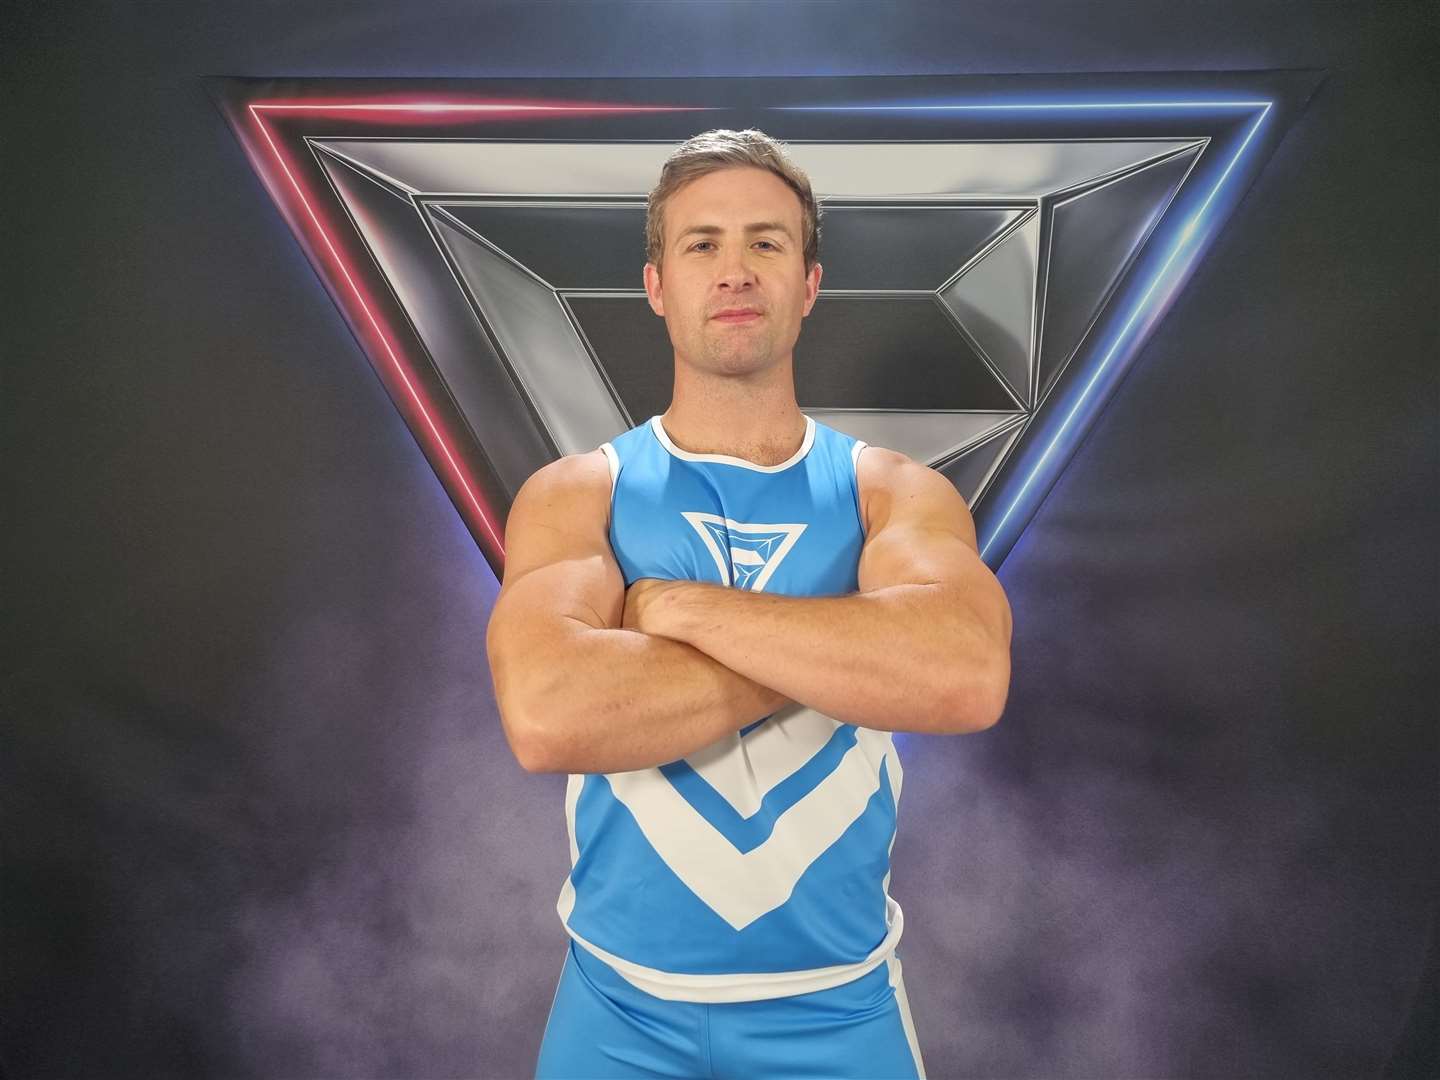 Finlay Anderson will compete in the Gladiators final this Saturday evening.